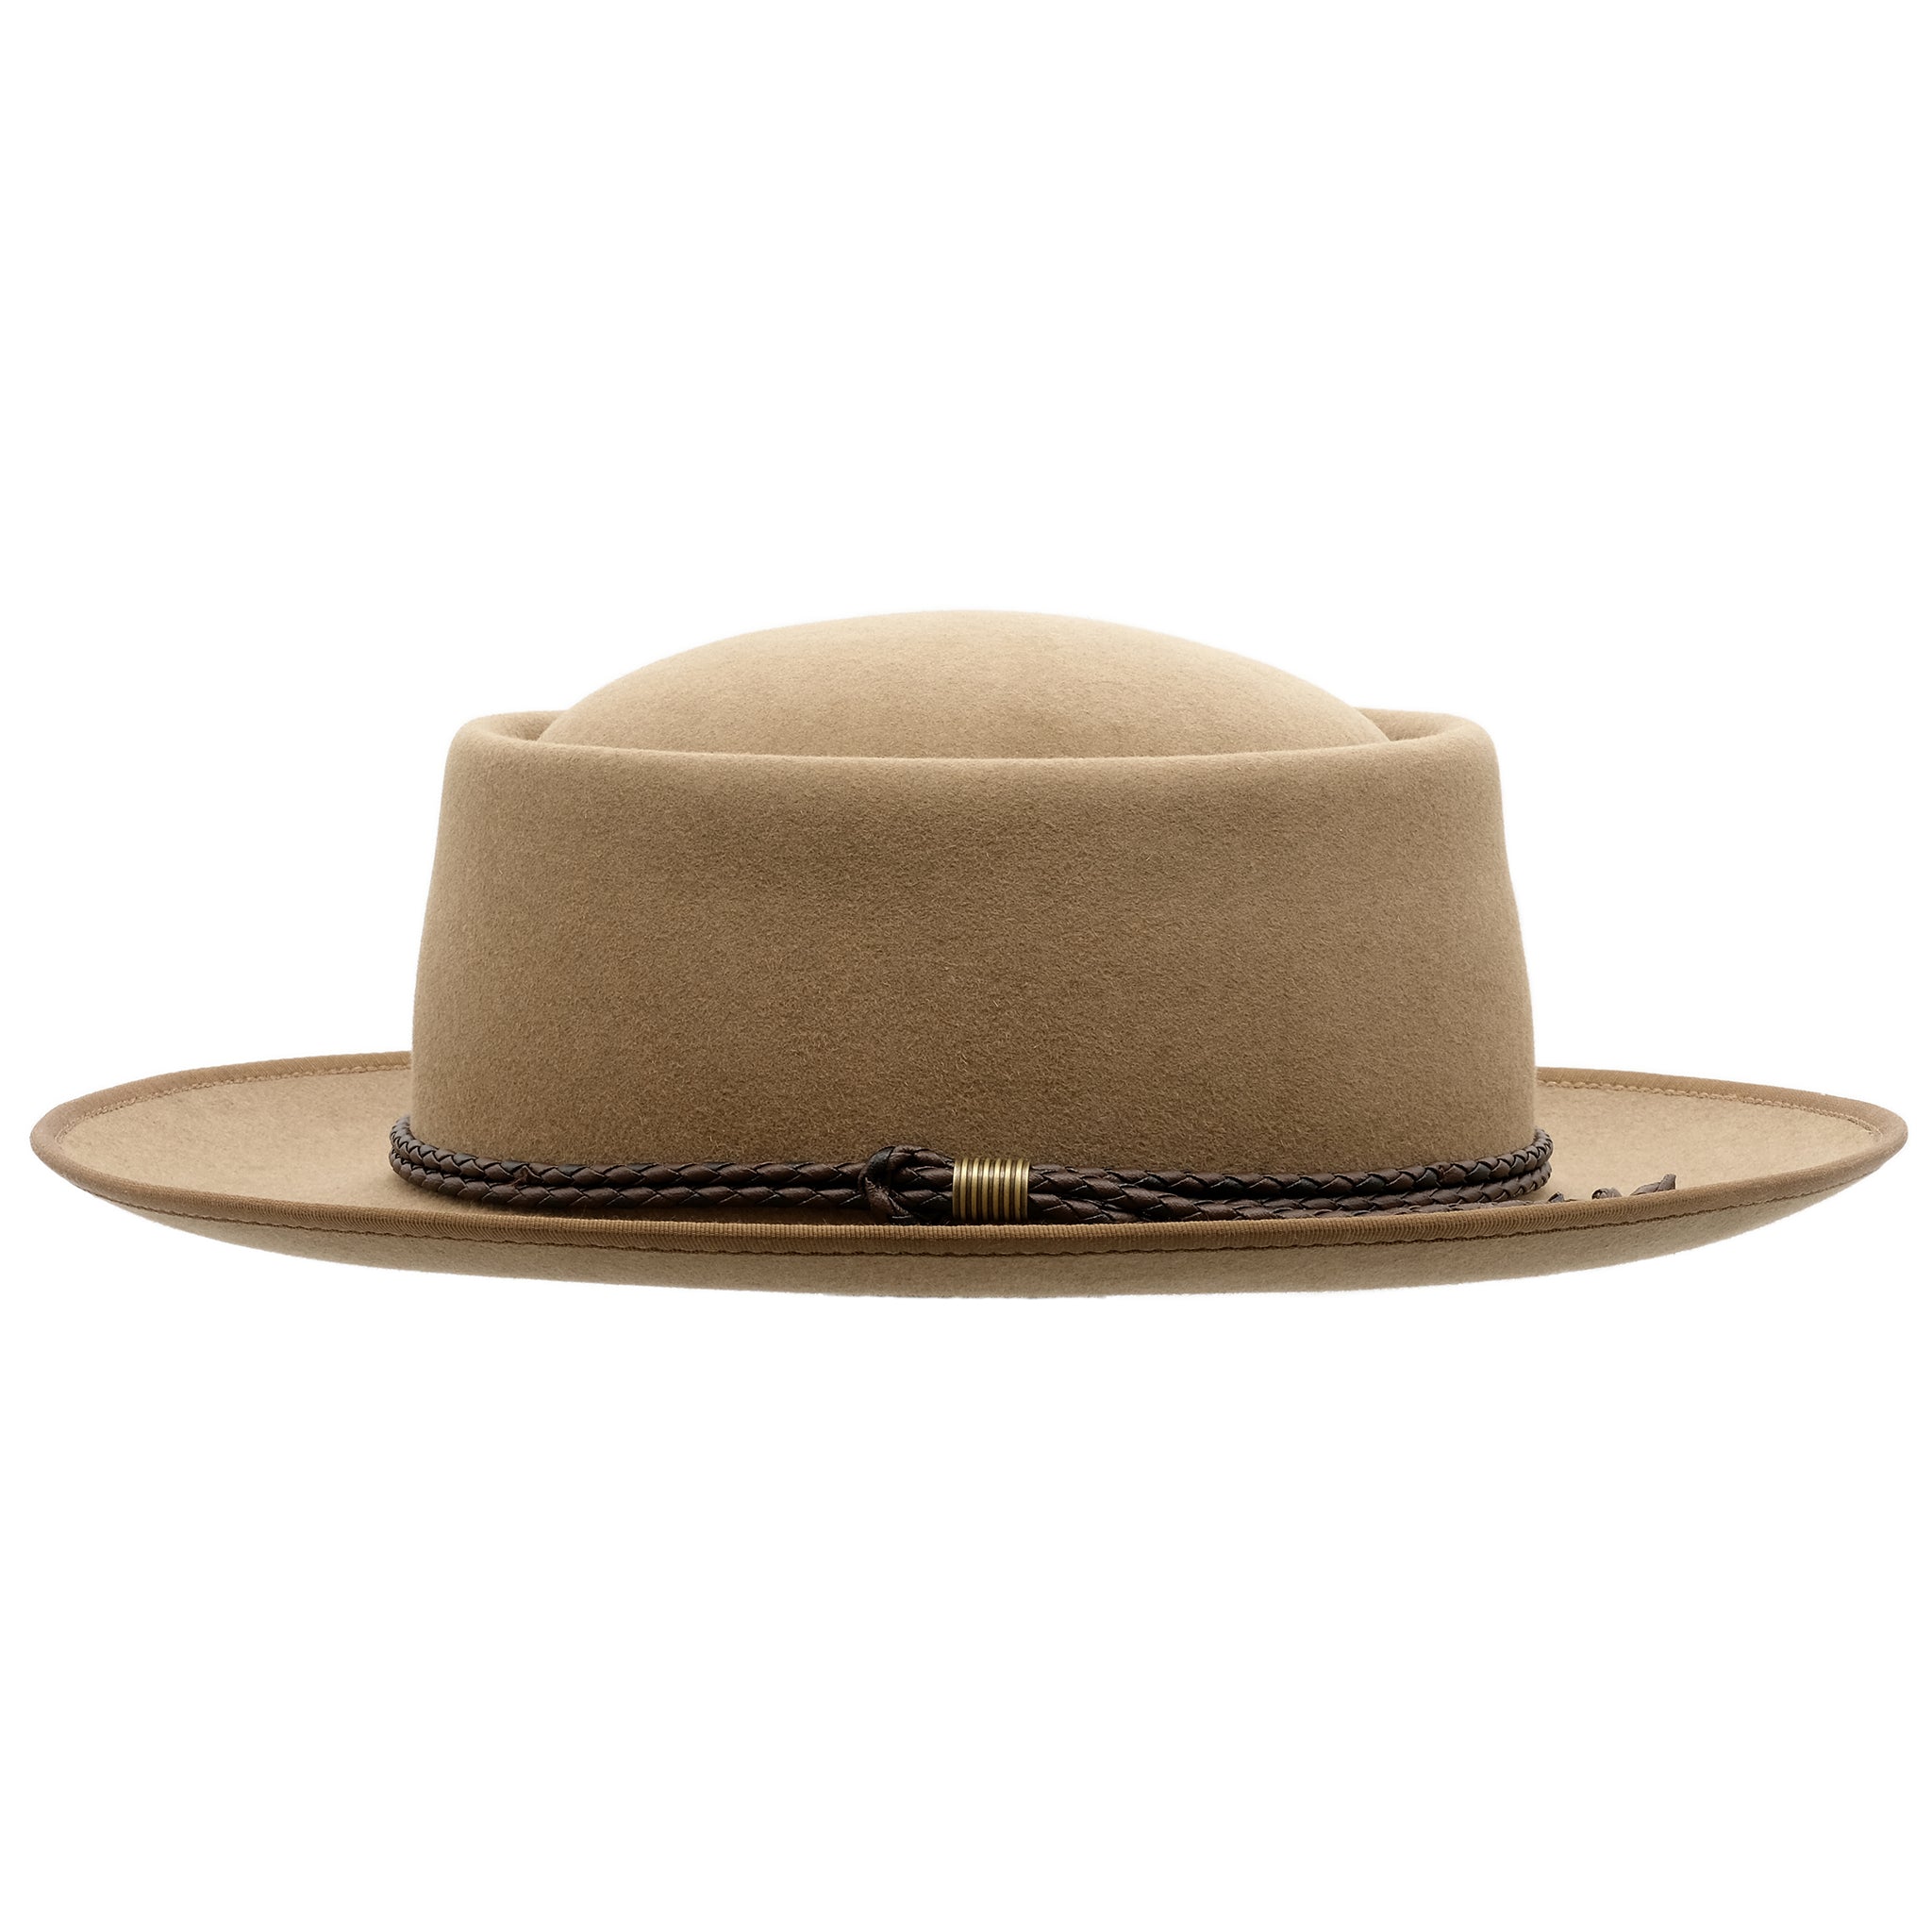 Side view of the Akubra Pastoralist hat in Tawny Fawn colour